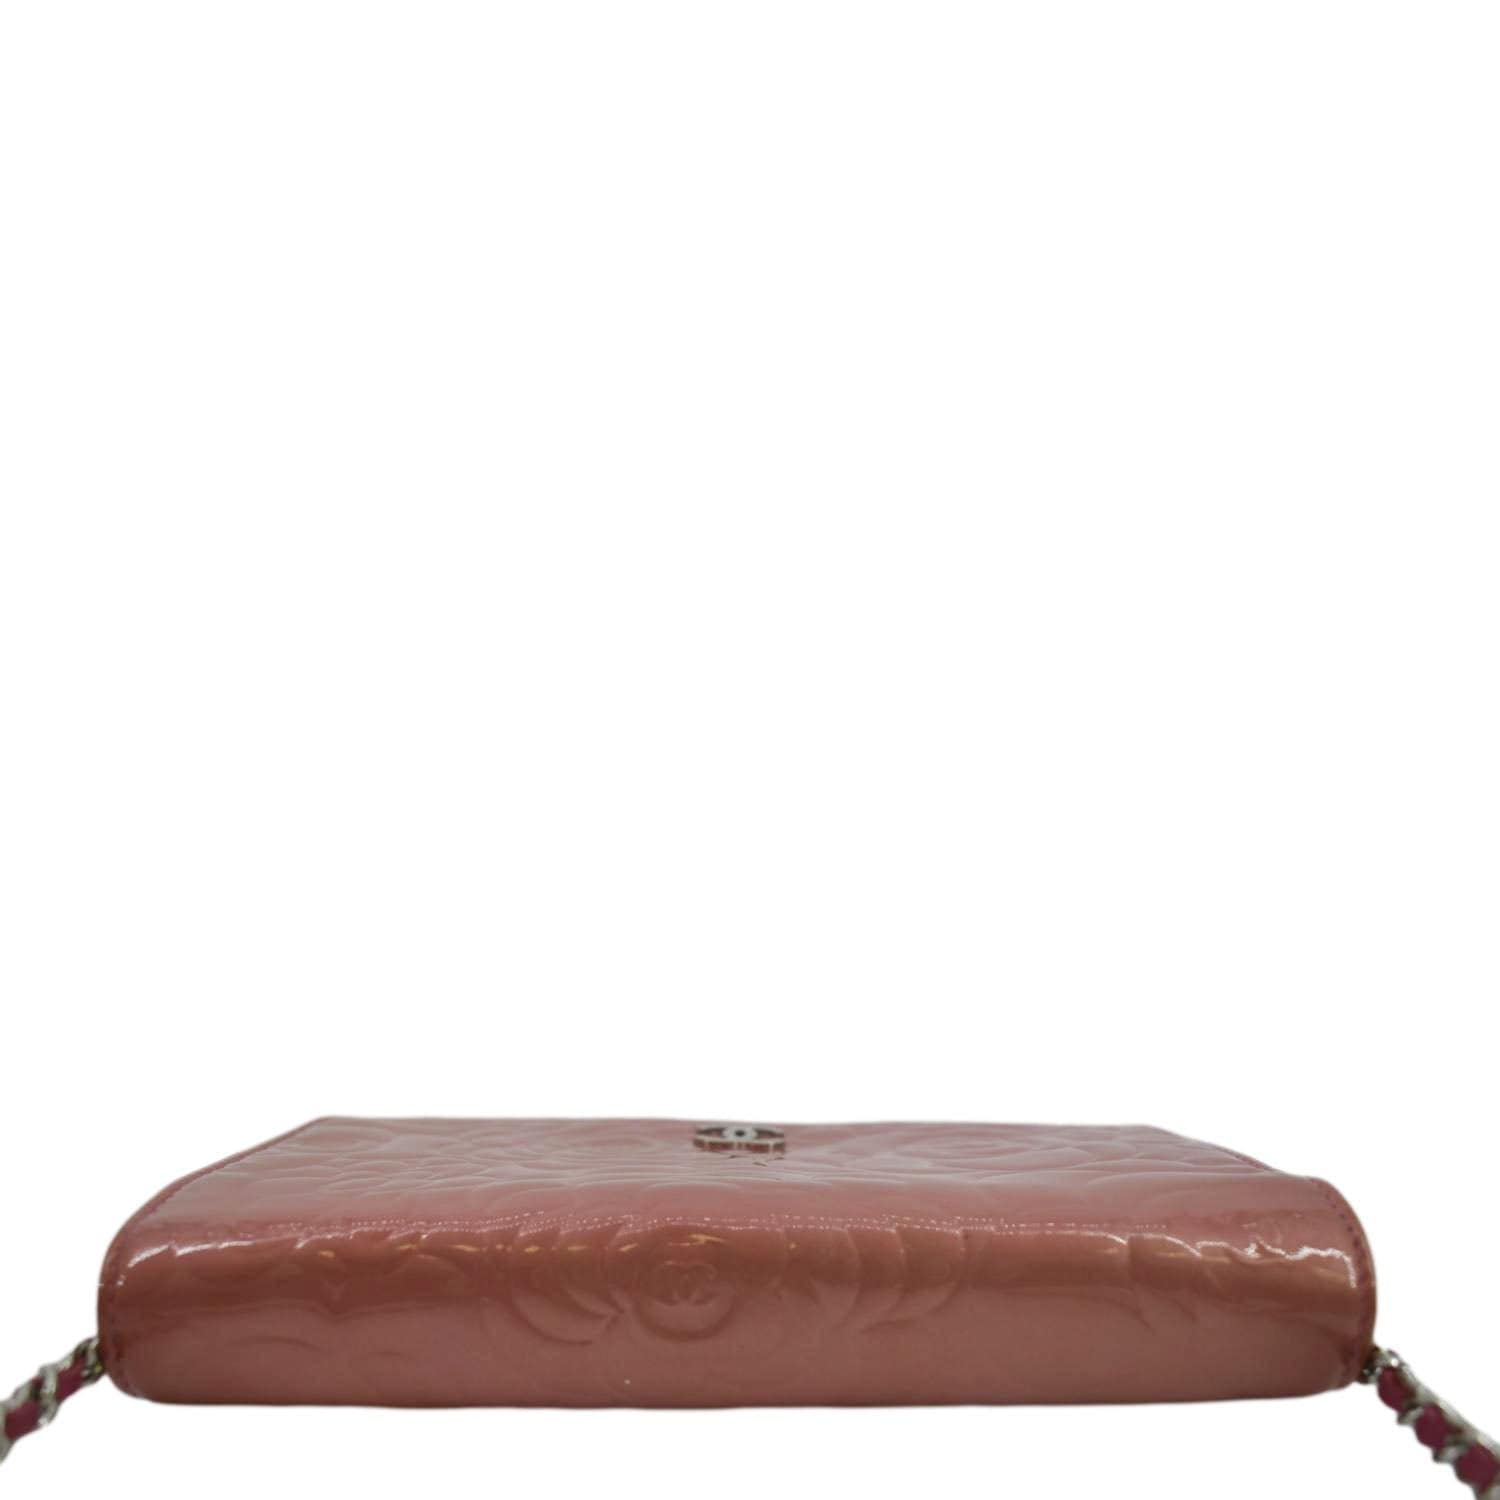 Chanel Clutch Lambskin Camellia Embossed Pink Wallet On A Chain C61